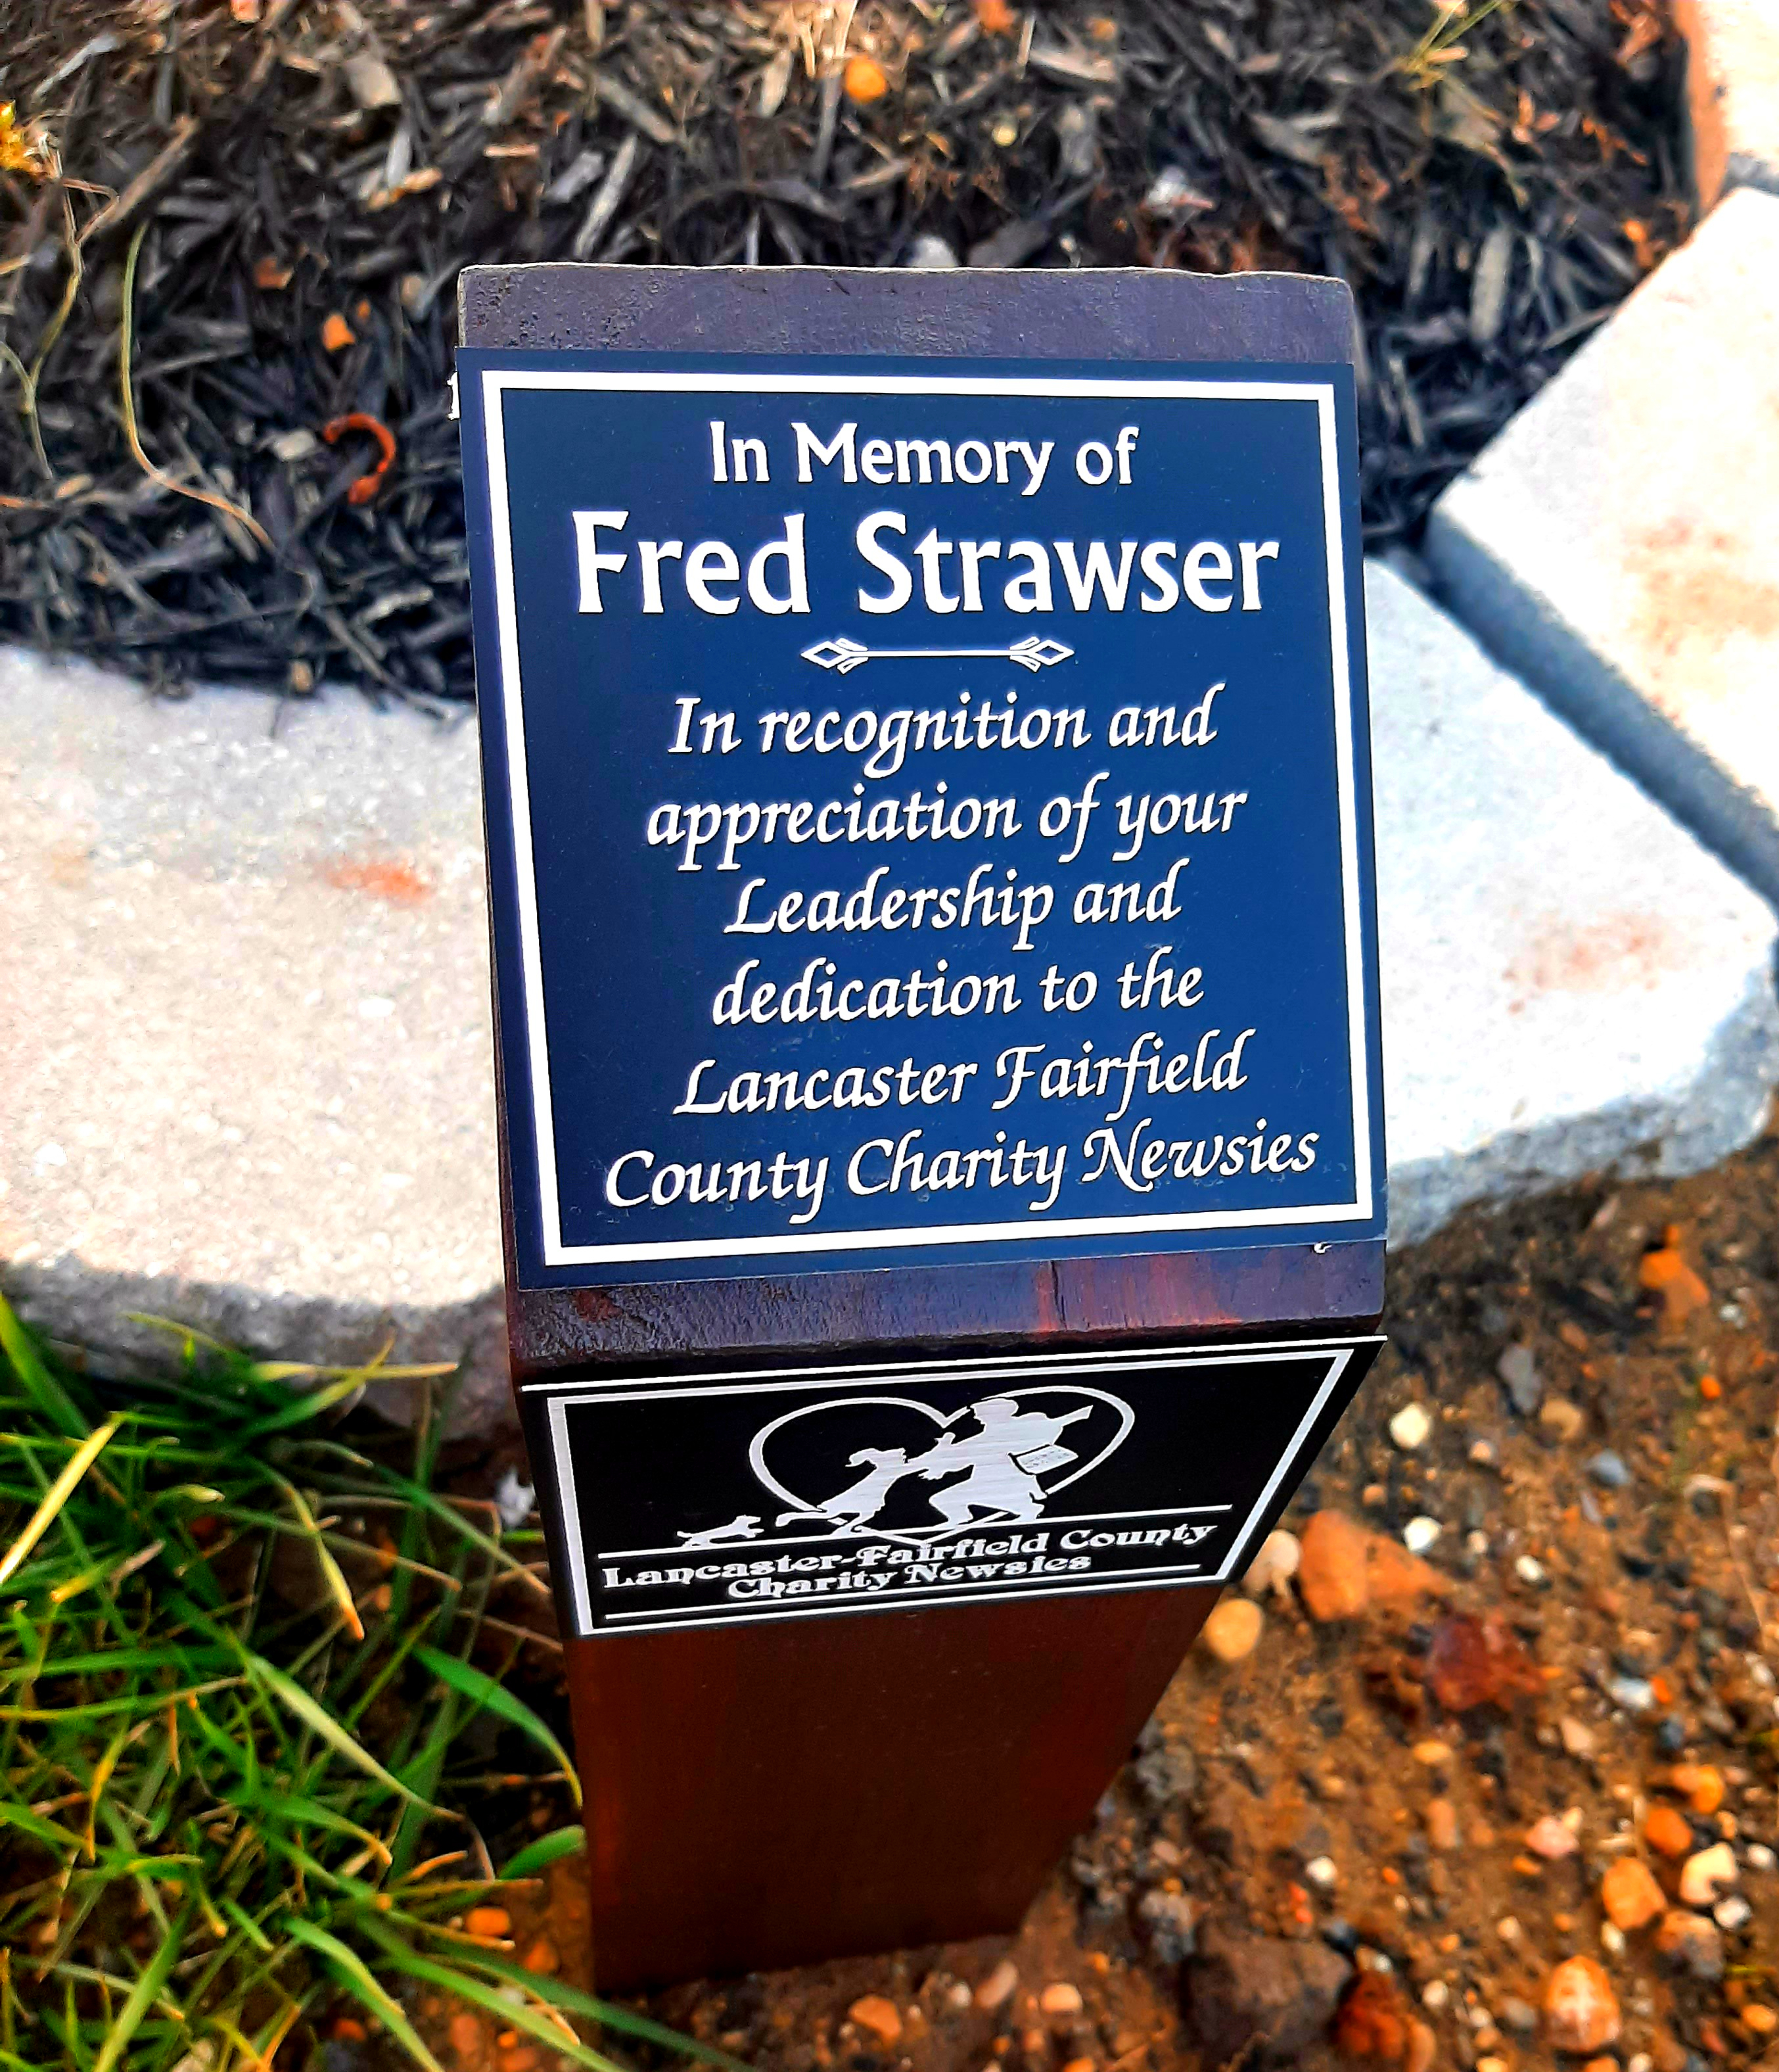 honor the memory of late past President and longtime Secretary Fred Strawser